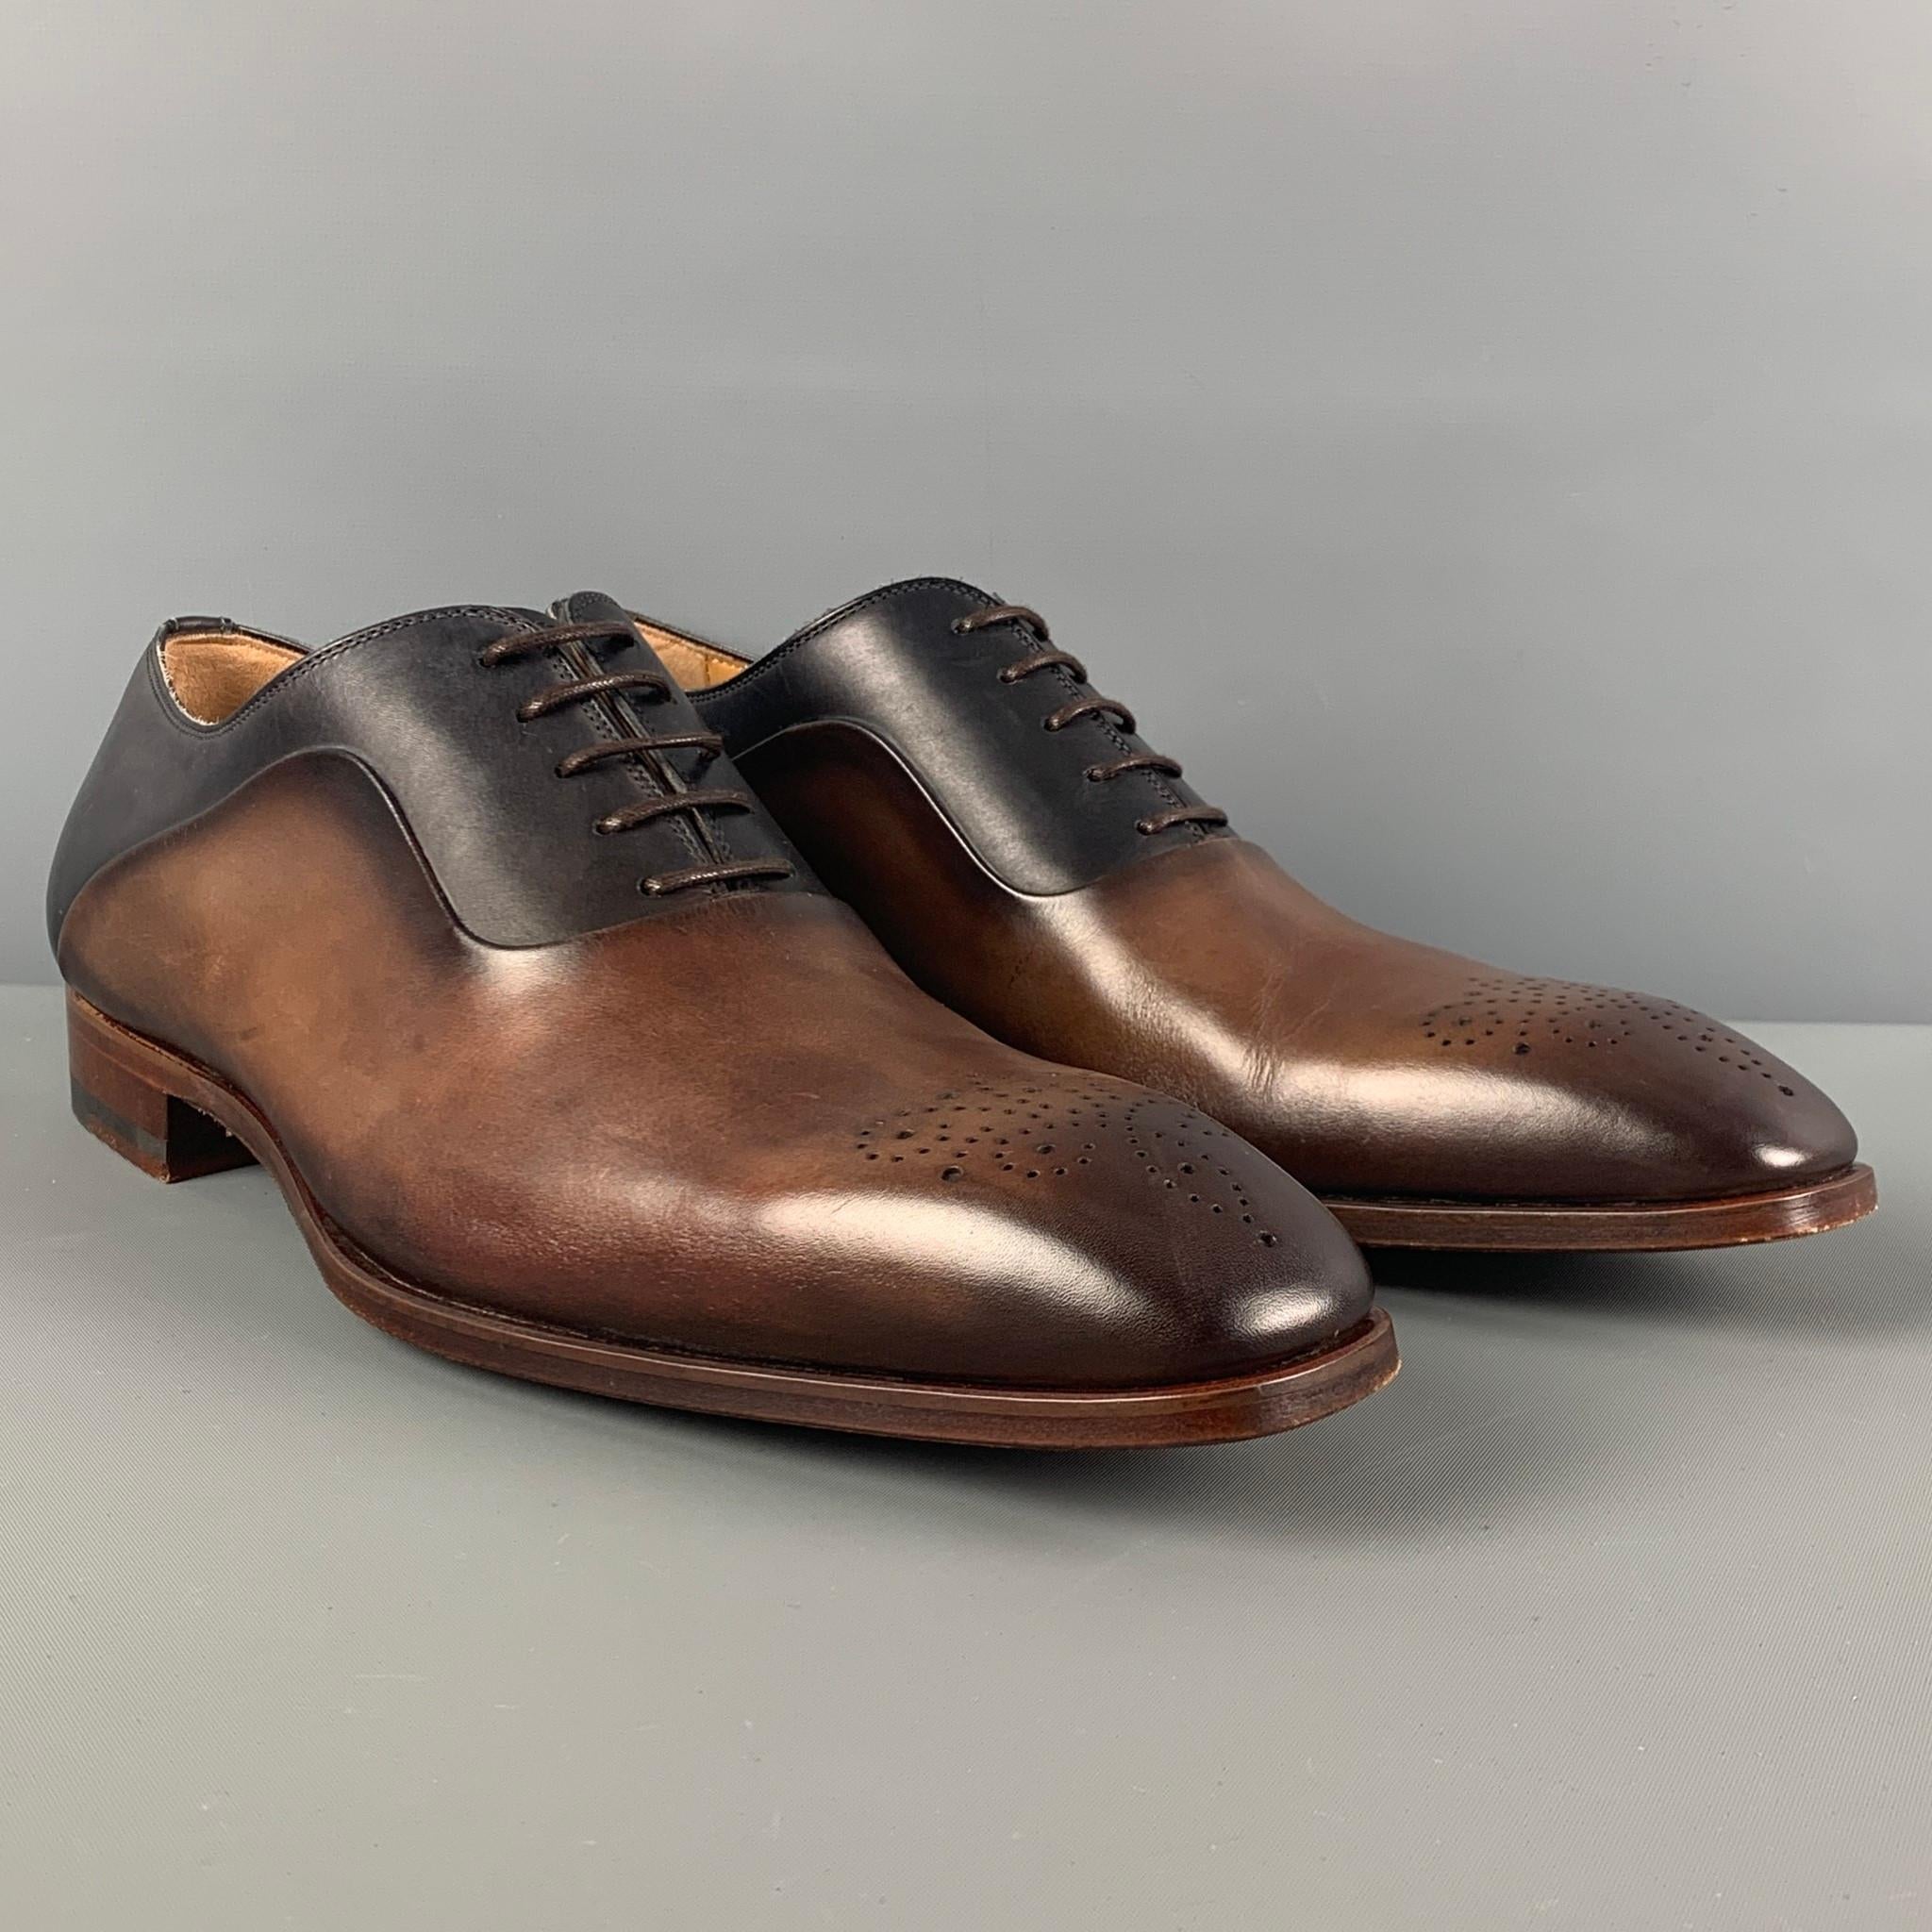 MAGNANNI shoes comes in a black & brown ombre leather featuring a square toe, perforated, and a lace up closure. Includes box. Made in Spain.

Very Good Pre-Owned Condition.
Marked: 20282 8.5 M
Original Retail Price: $498.00

Outsole: 12 in. x 4 in.